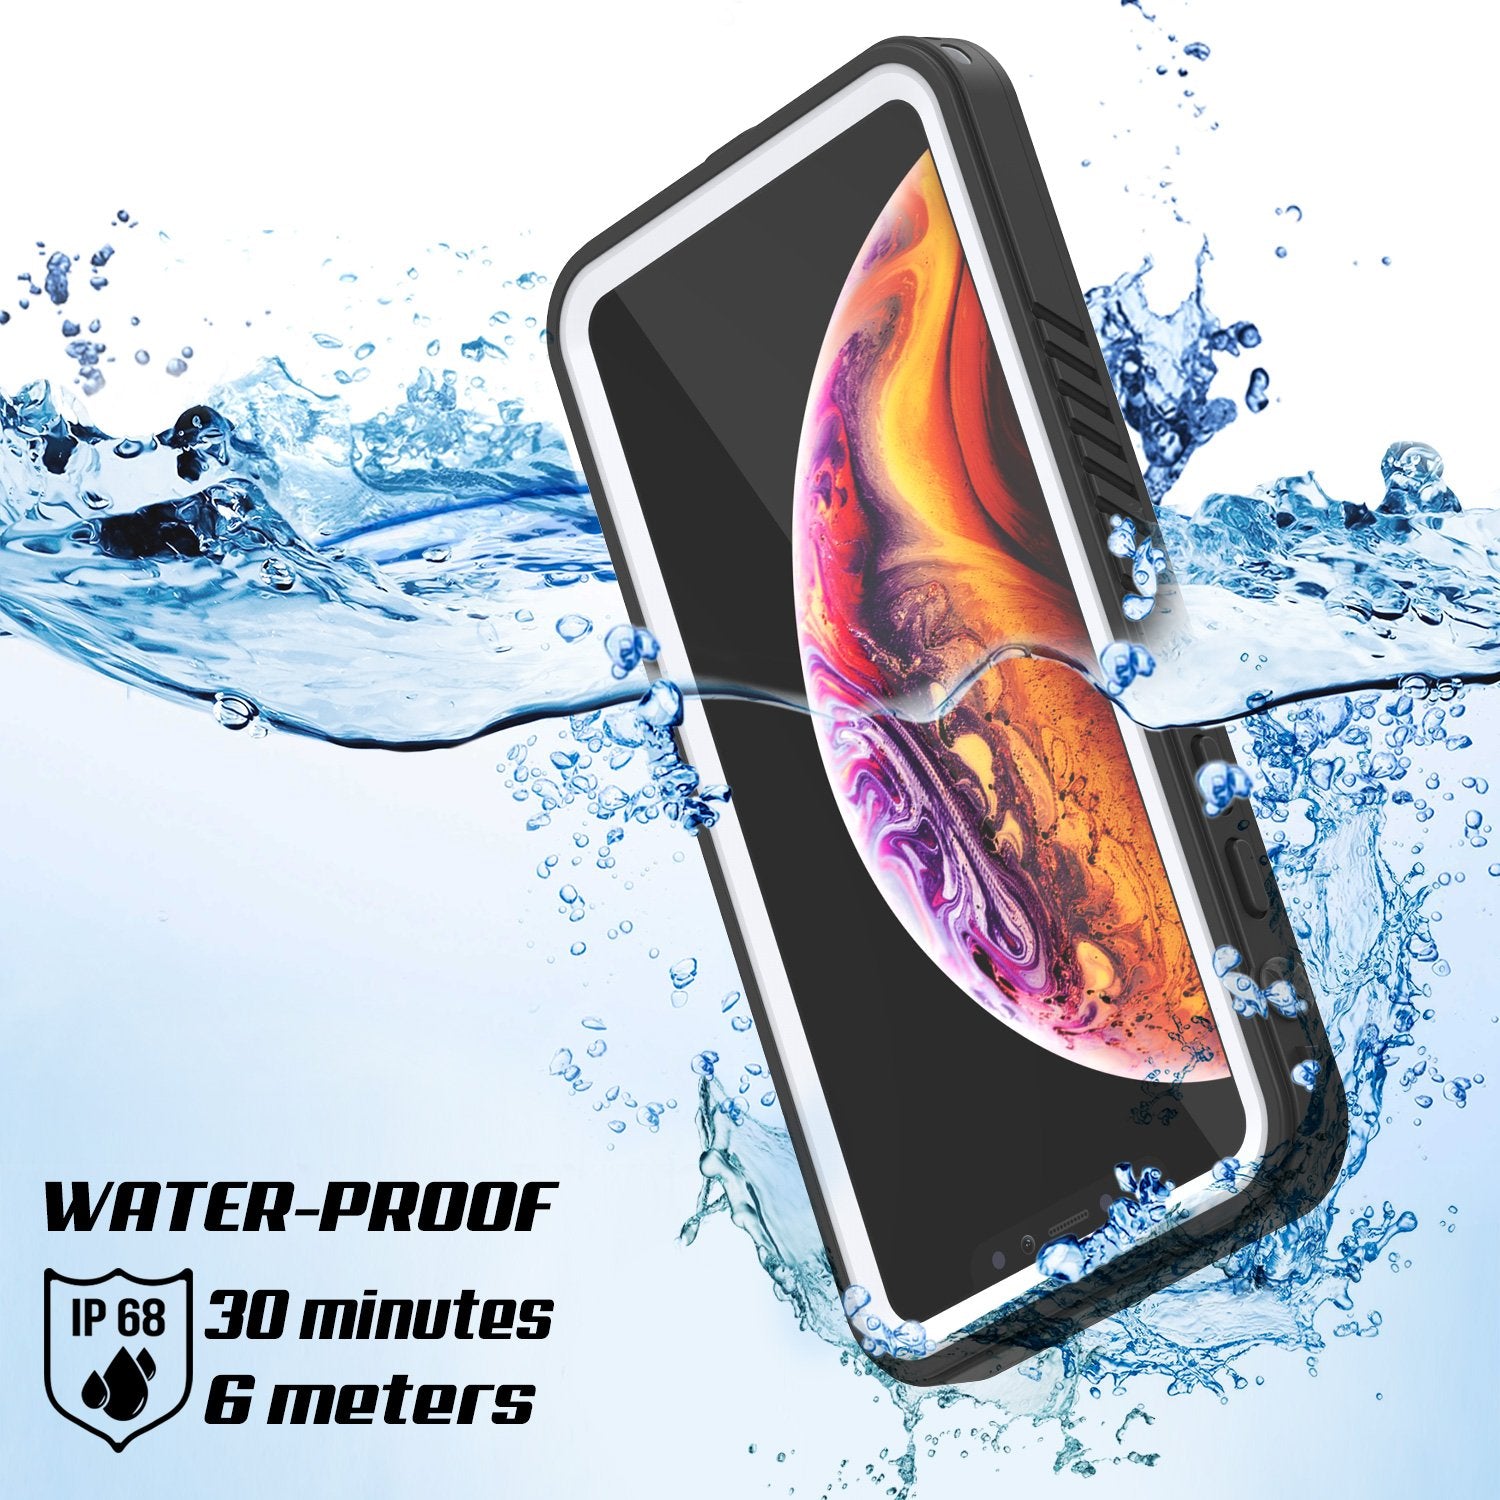 iPhone XR Waterproof Case, Punkcase [Extreme Series] Armor Cover W/ Built In Screen Protector [White]